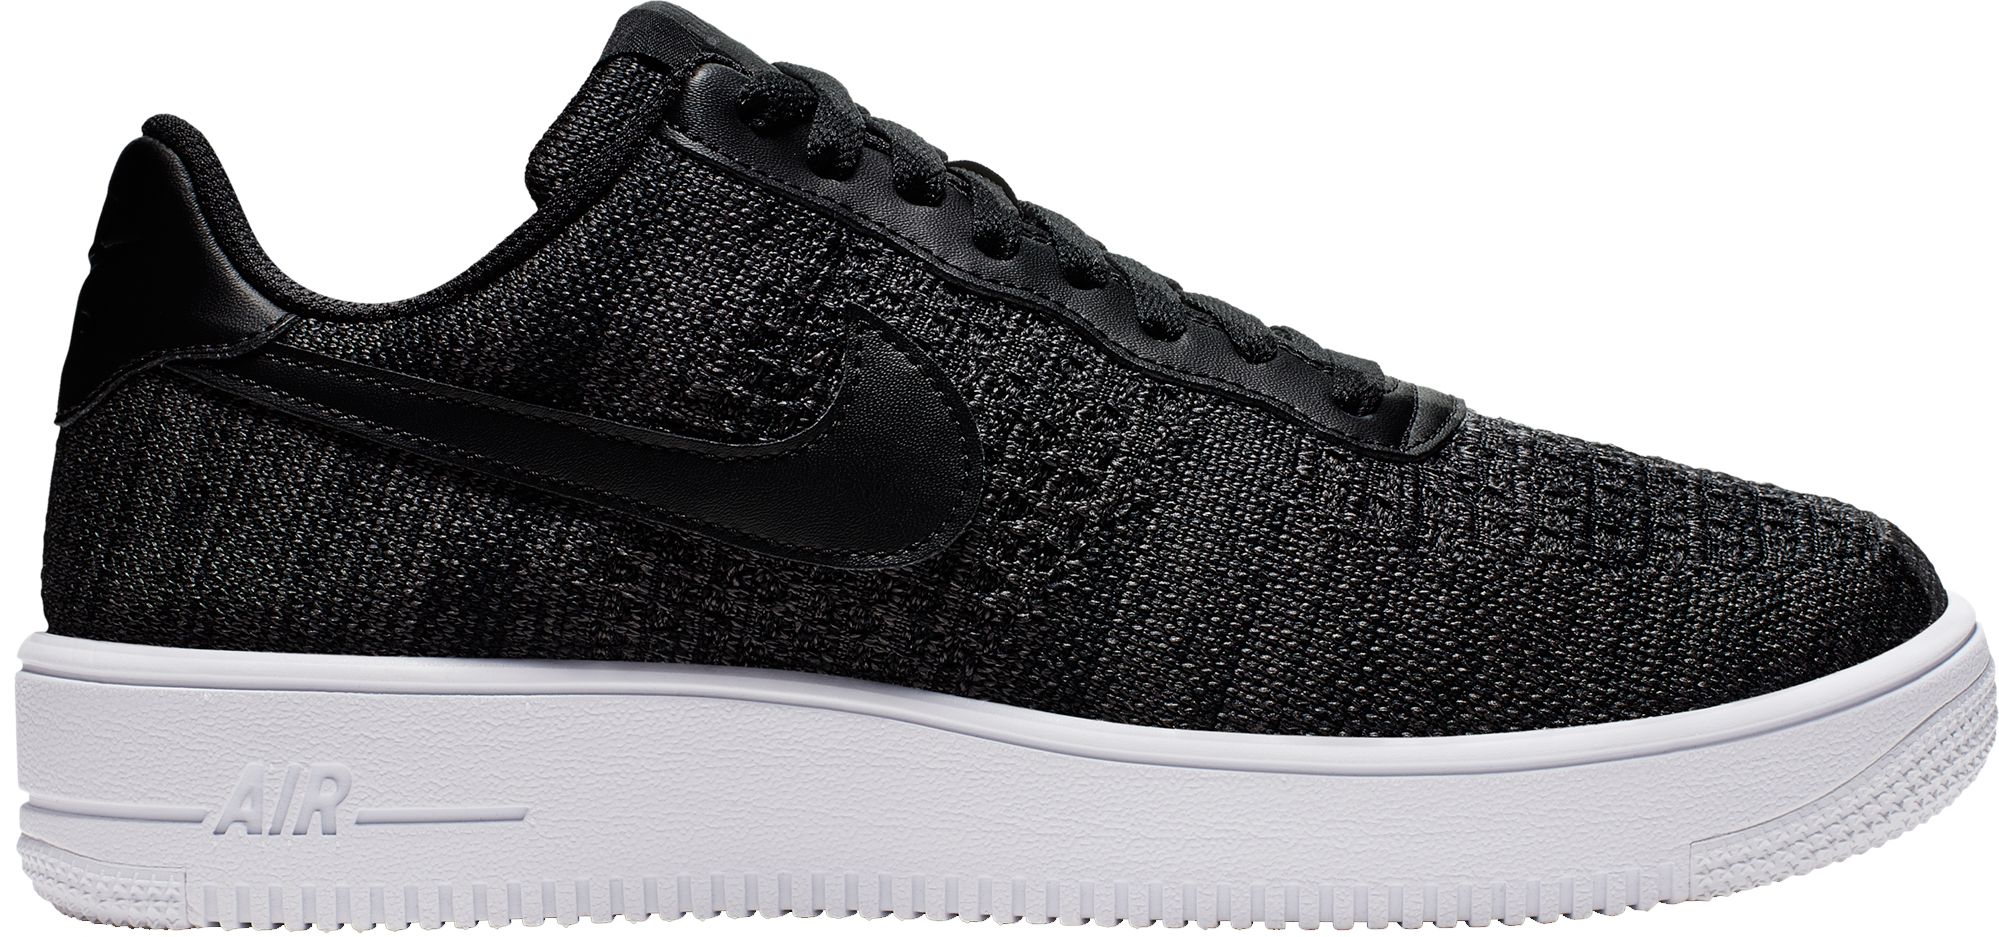 air force flyknit 1